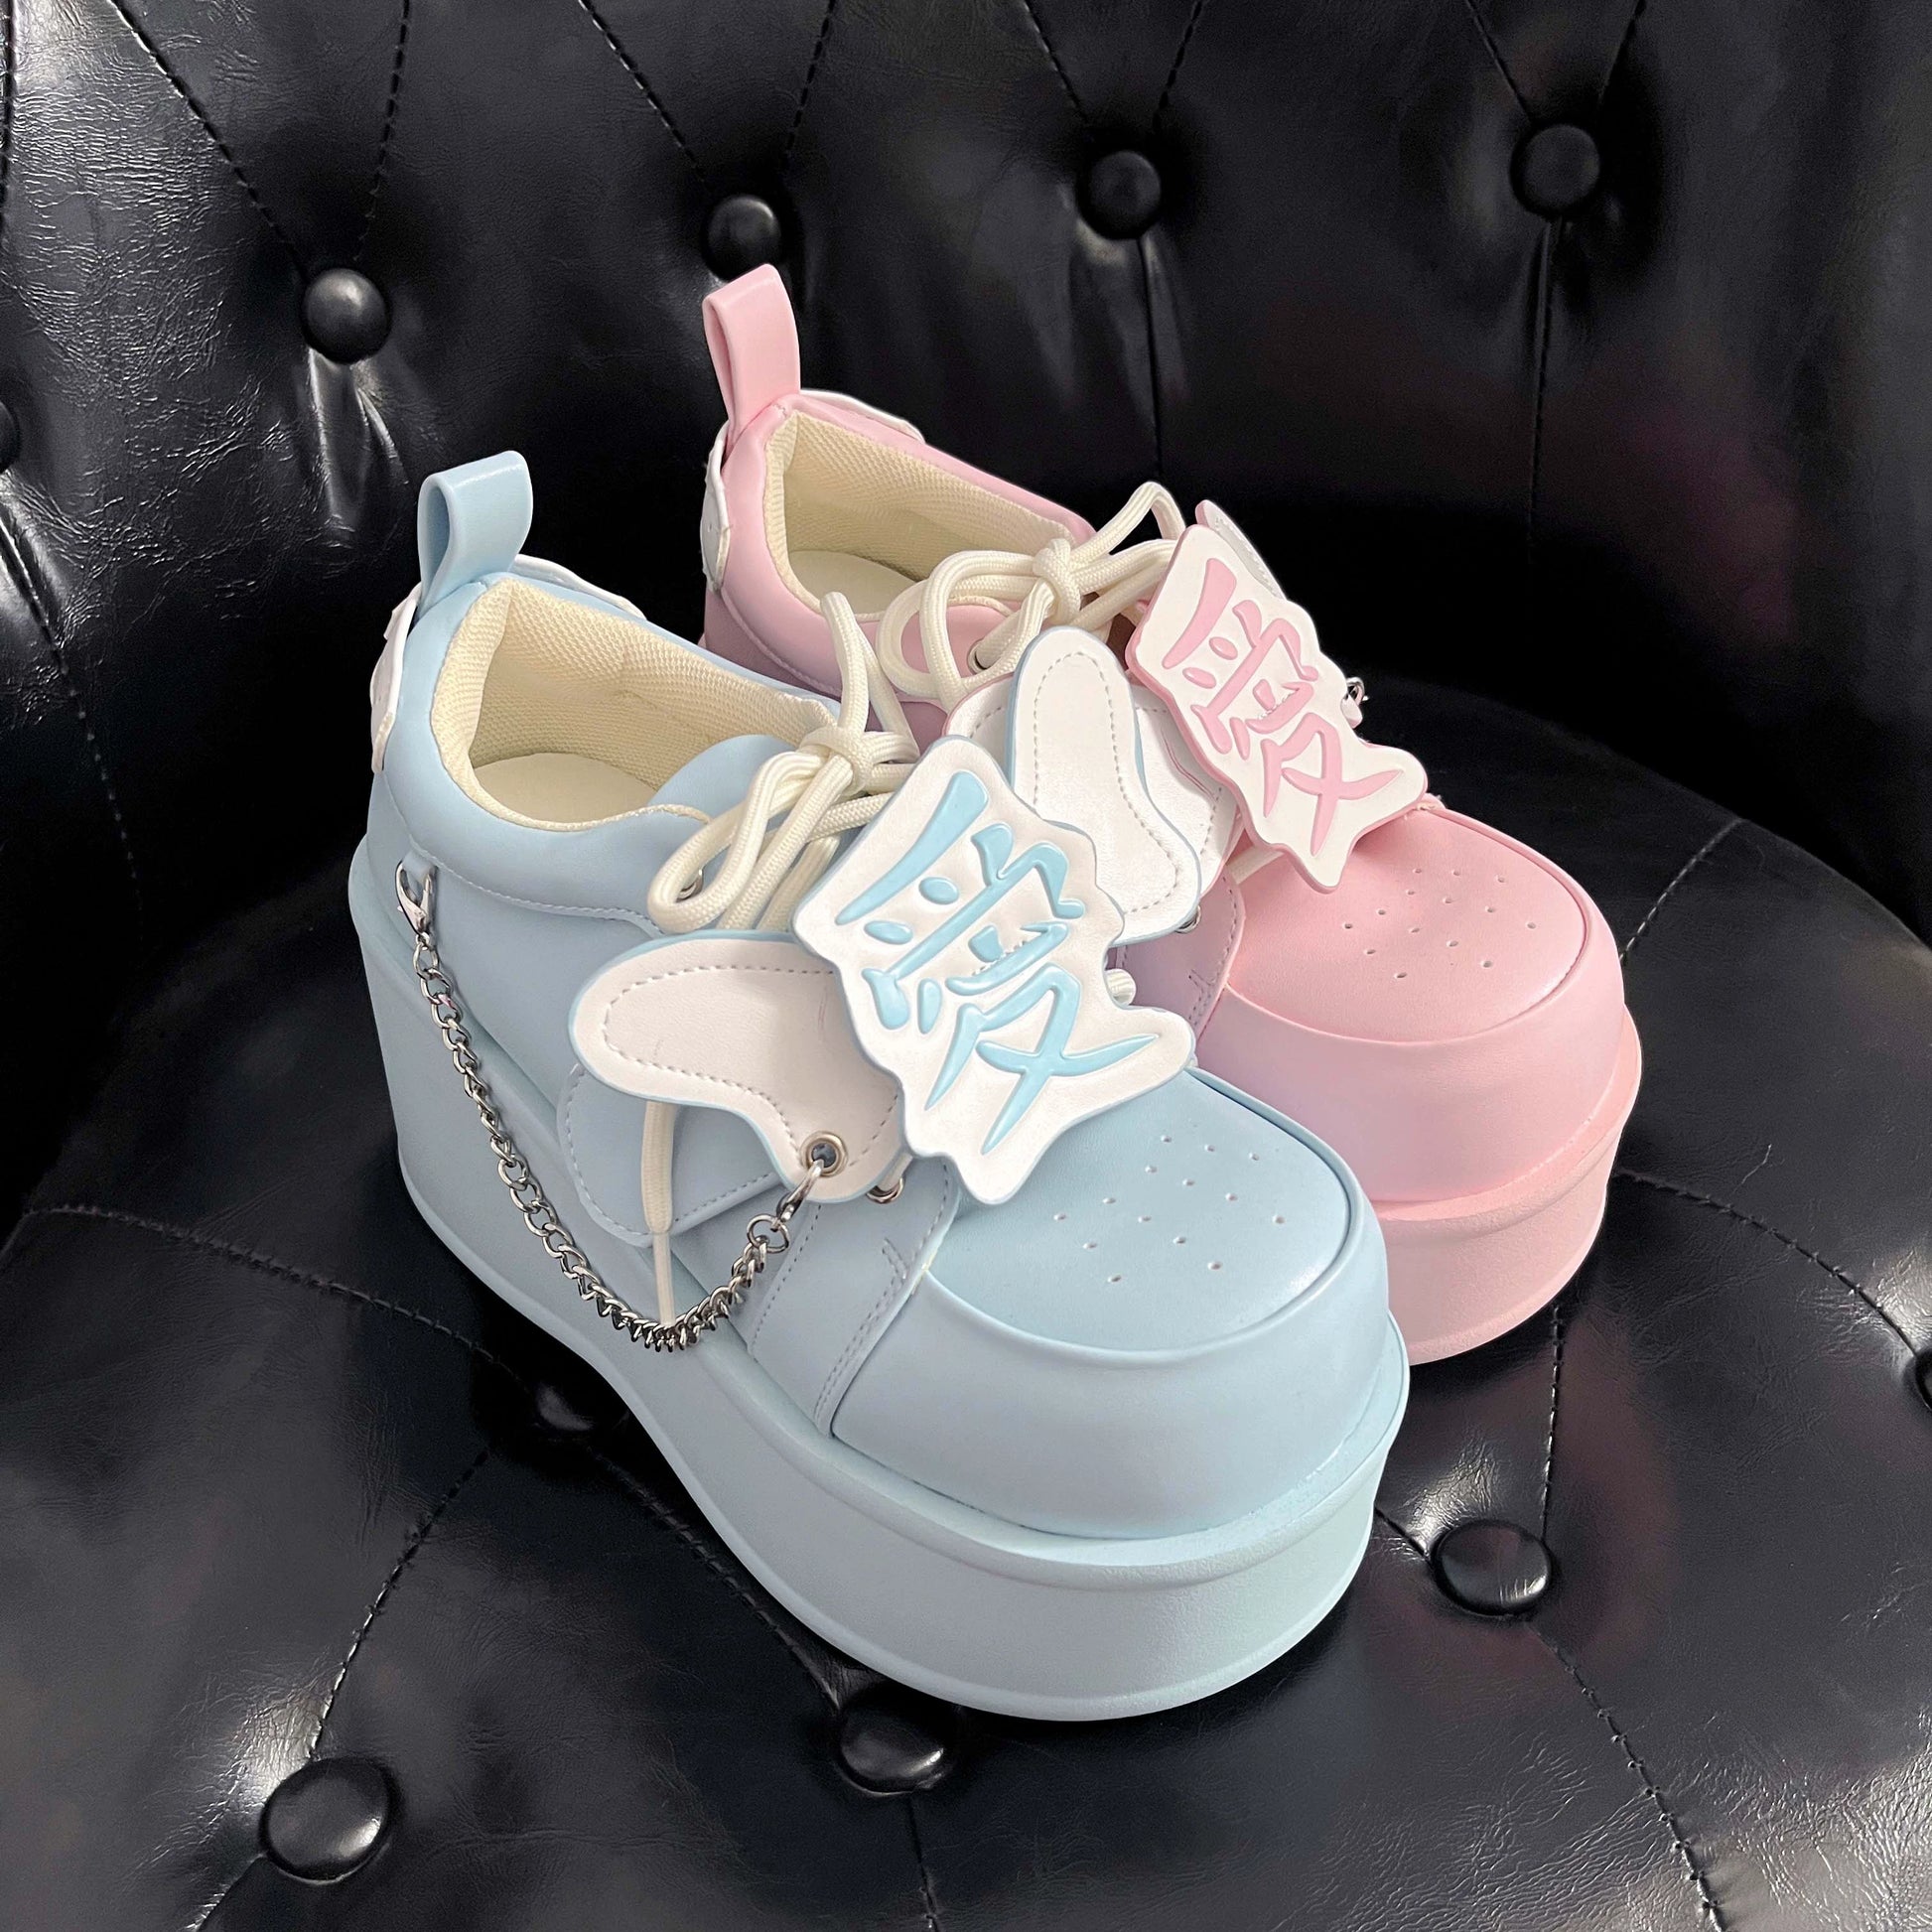 Tenshi Kaiwai Platform Shoes Subculture Thick-soled Shoes 35748:503452 35748:503452